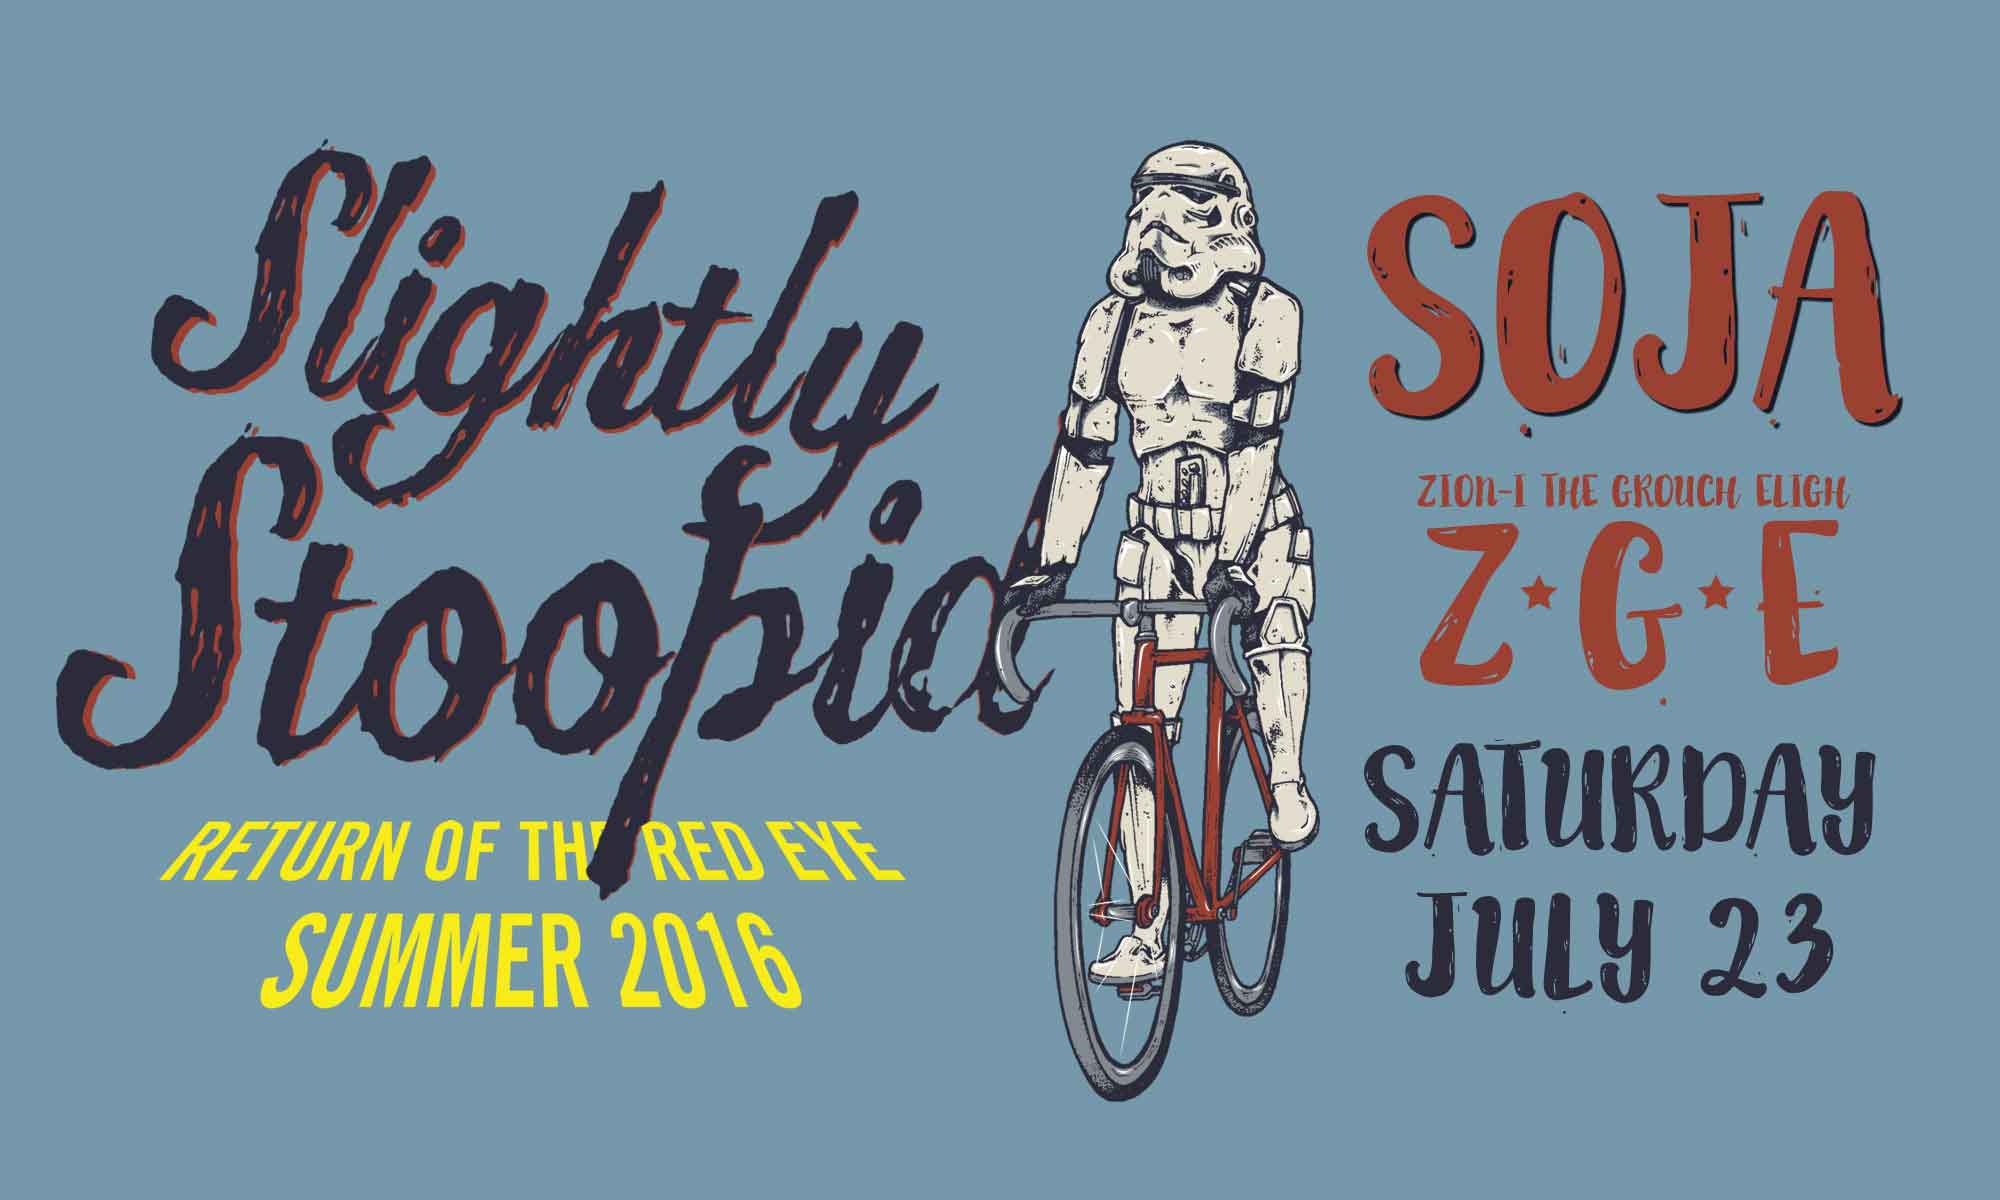 Slightly Stoopid: Return of the Red Eye Tour at Coney Island Amphitheater on 07-23-16